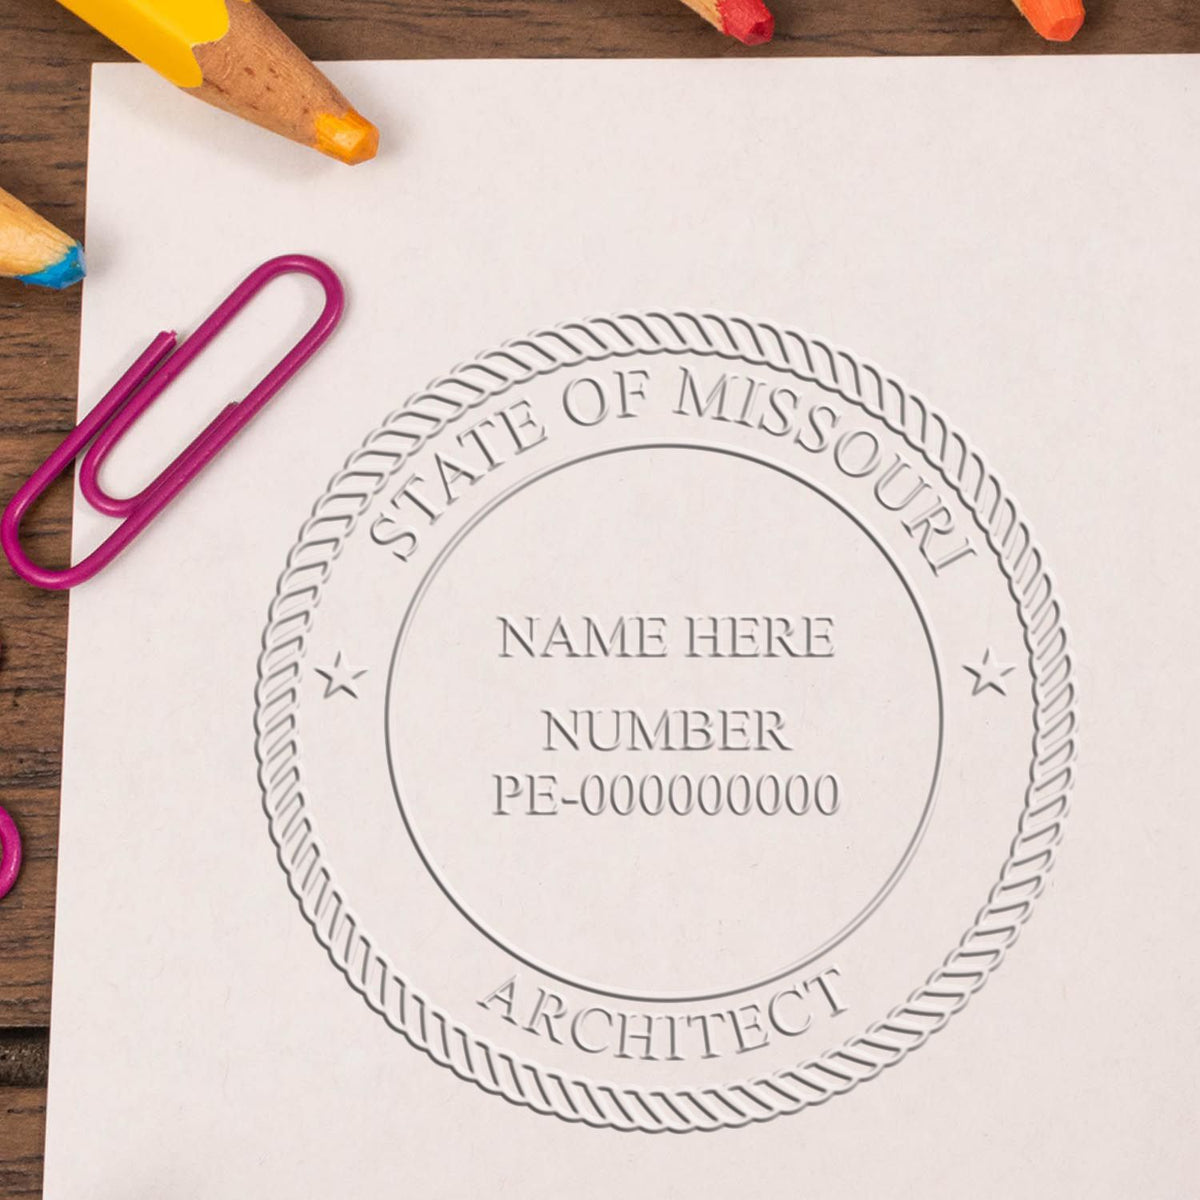 This paper is stamped with a sample imprint of the Extended Long Reach Missouri Architect Seal Embosser, signifying its quality and reliability.